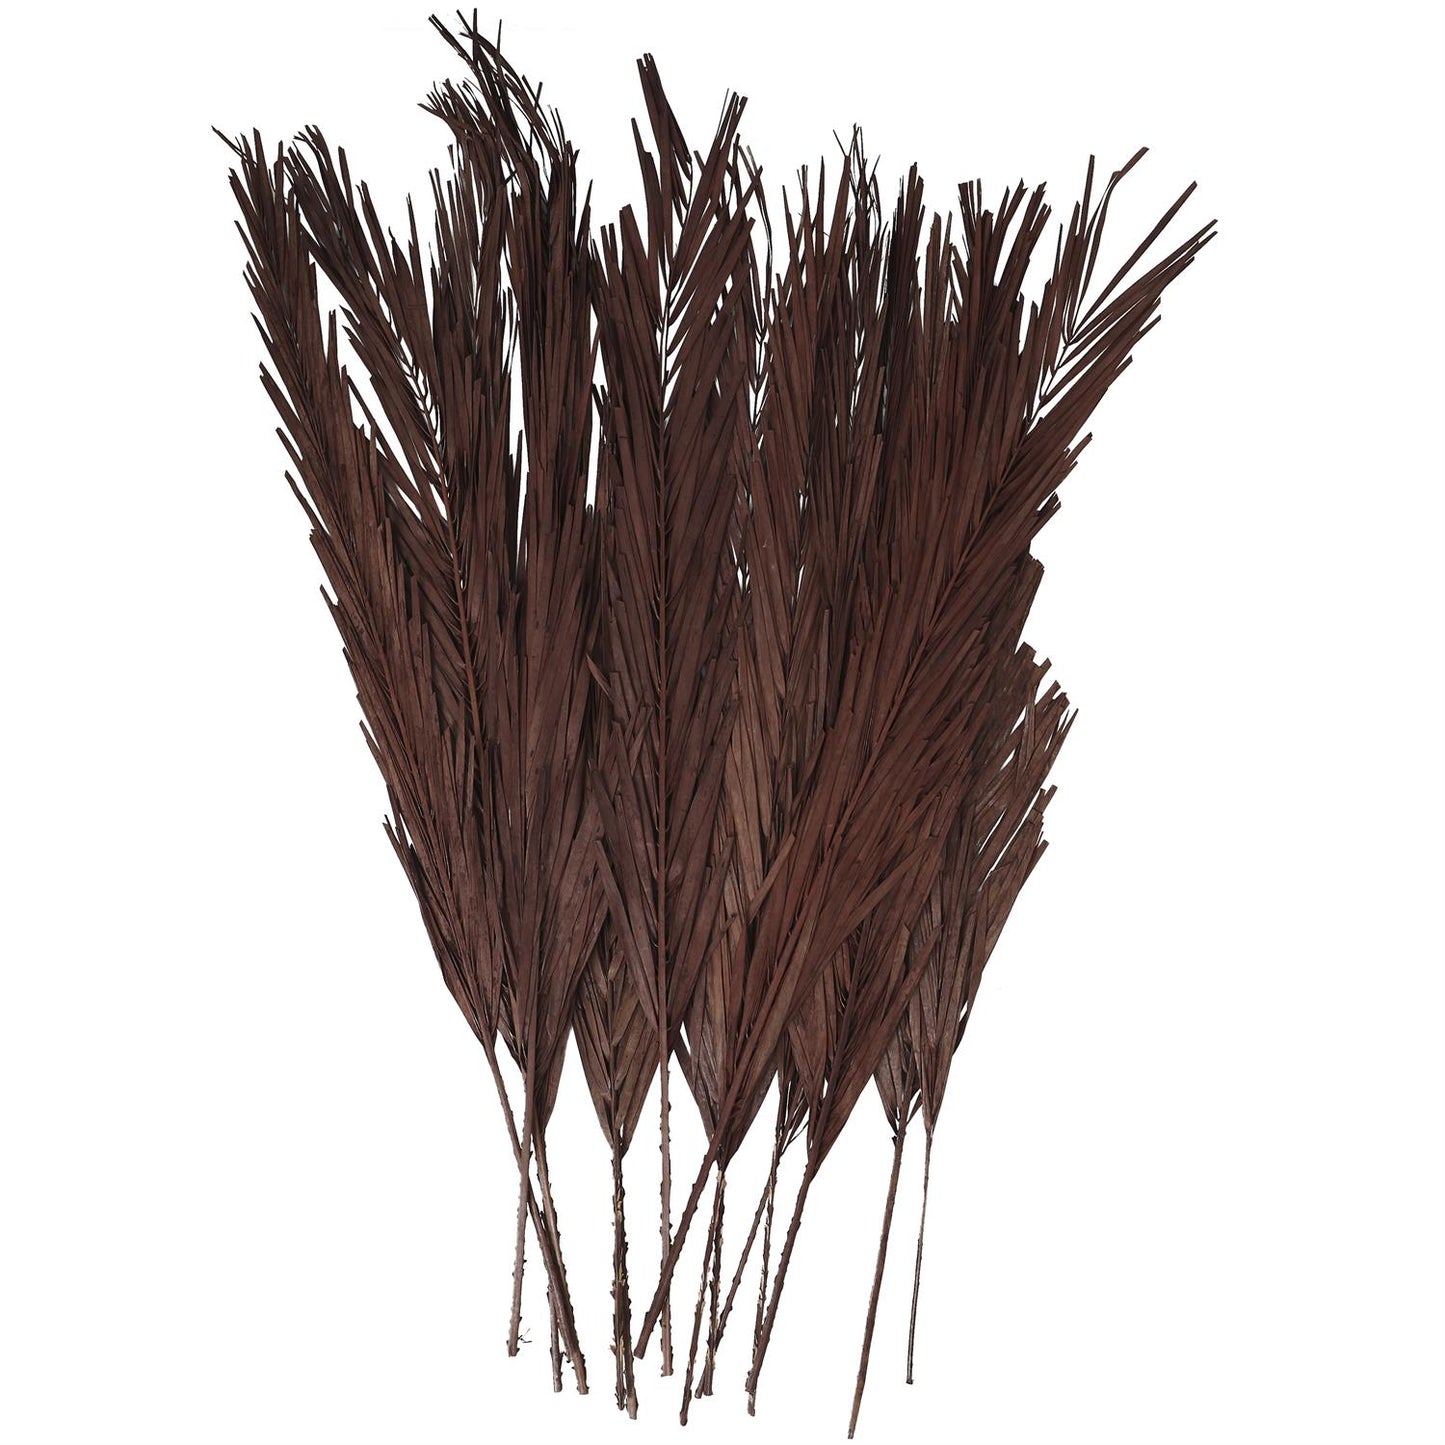 Dark Brown Dried Plant Palm Leaf Natural Foliage With Feather Inspired Stems